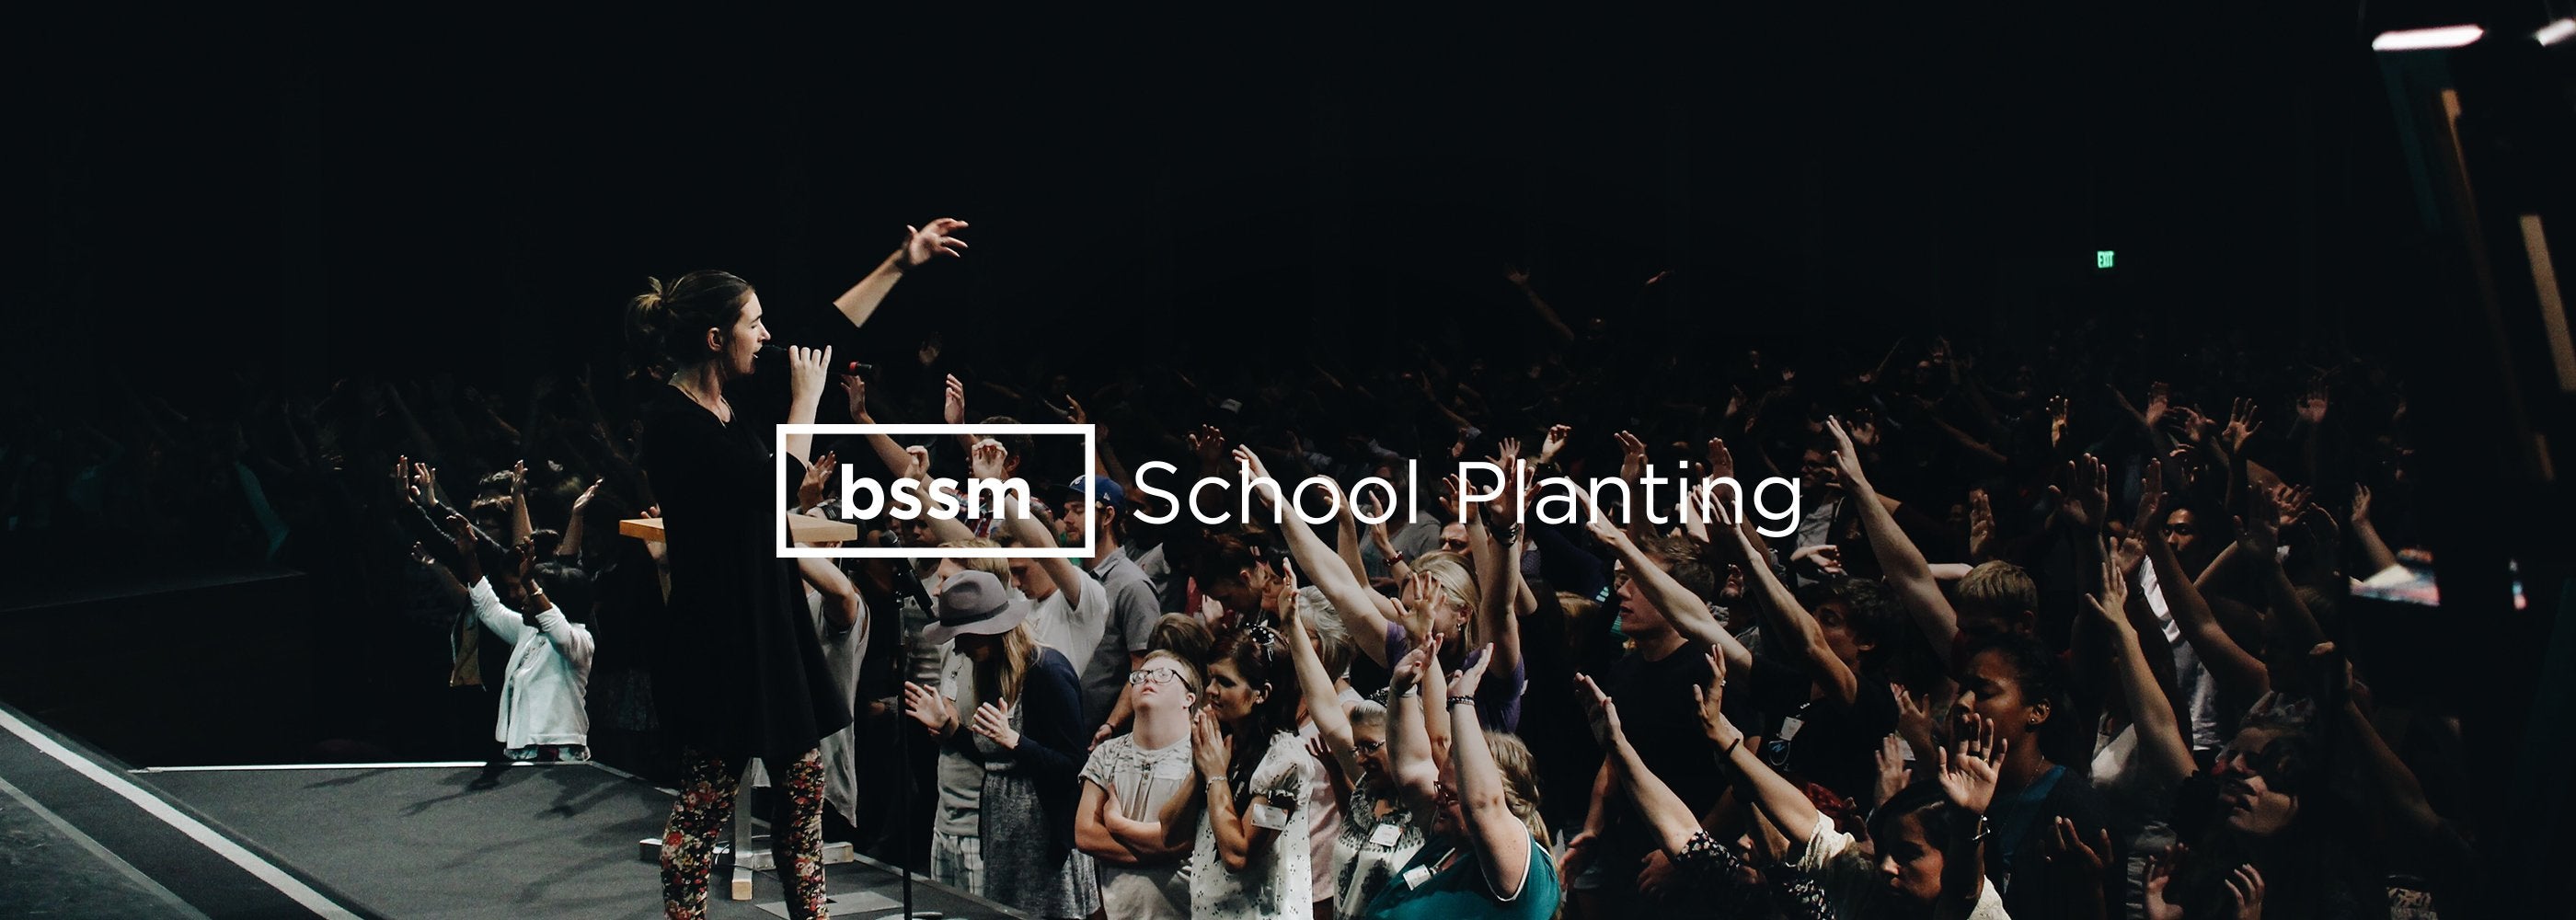 BSSM School Planting collection at Bethel Store equips school leaders to transform lives and communities through supernatural ministry.